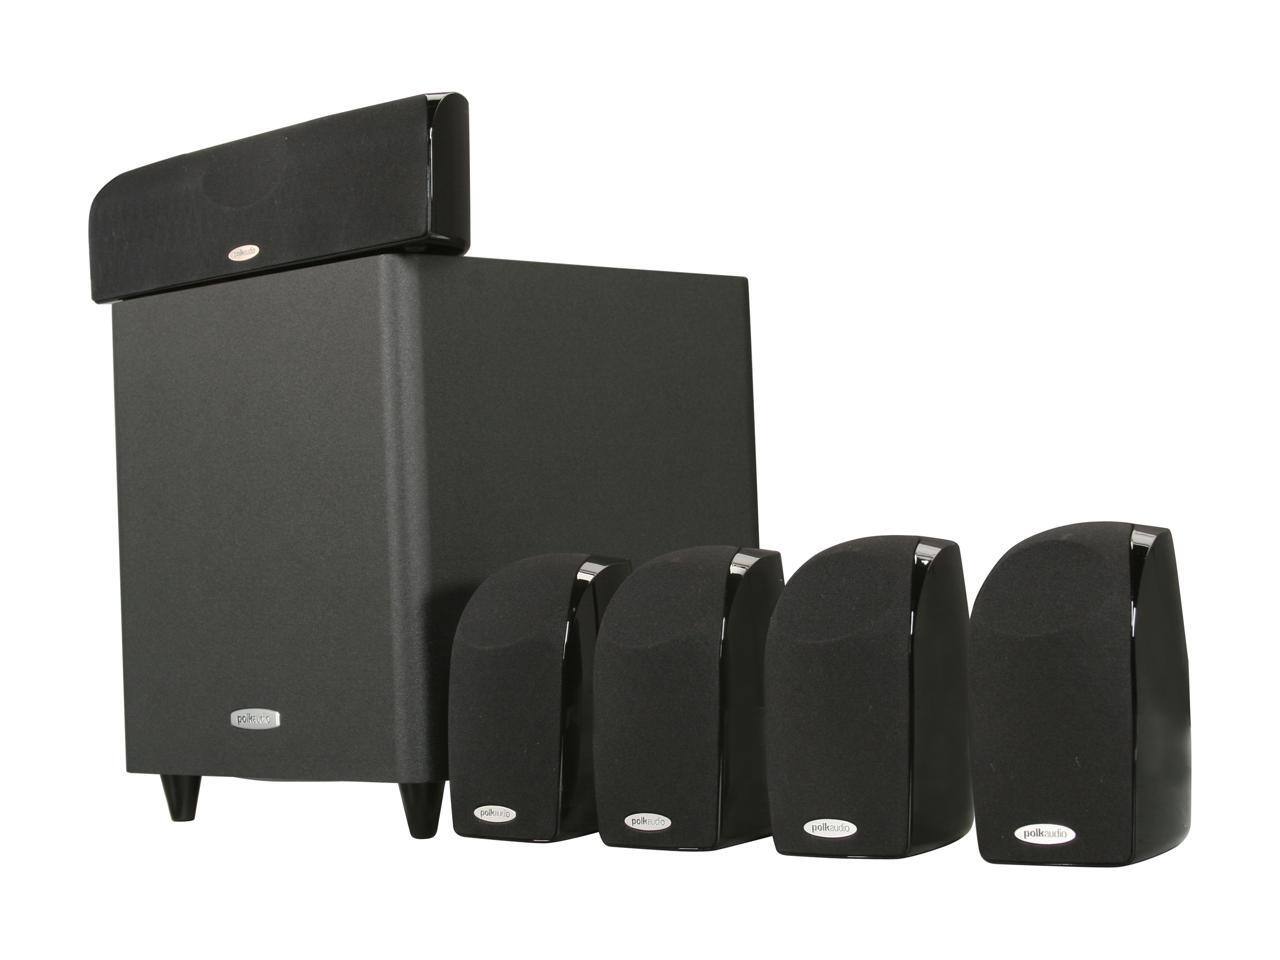 Polk Audio TL1600 5.1 Compact Surround Sound Home Theater System with Powered Subwoofer $179 + FS